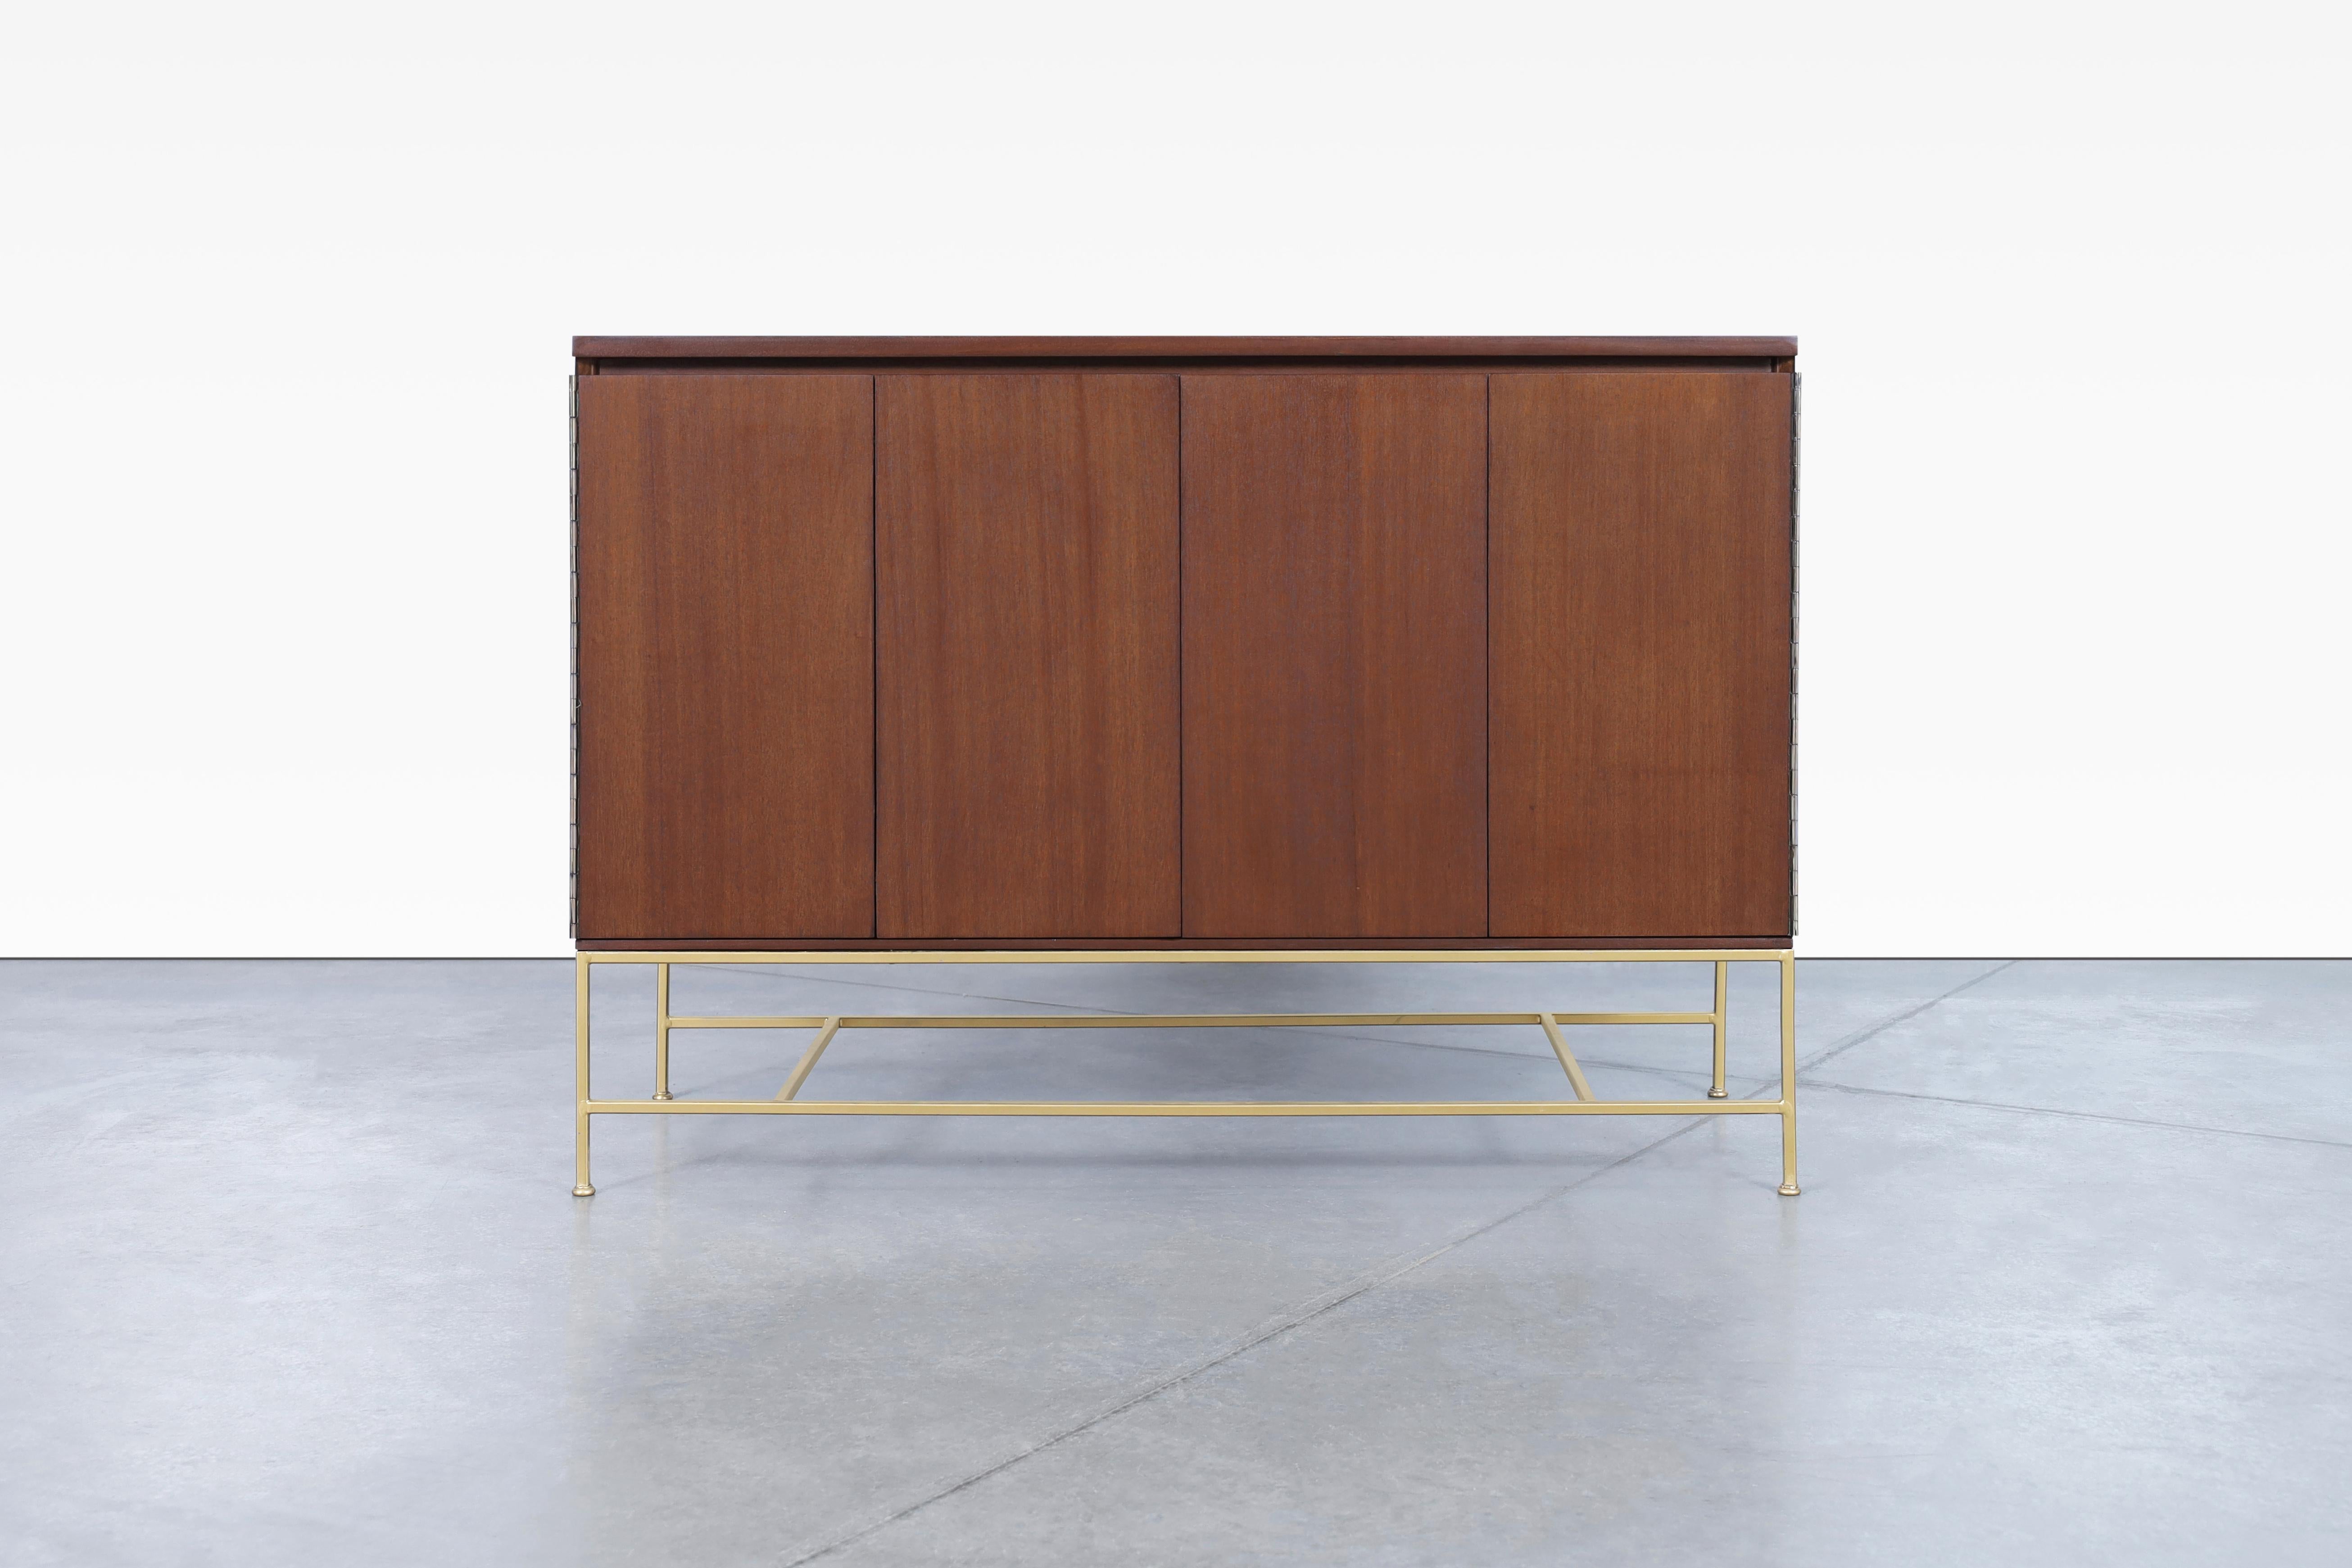 Beautiful vintage “Irwin Collection” mahogany and brass credenza by Paul McCobb for Calvin Furniture, manufactured in the United States, circa 1950s. This piece is a true representation of McCobb's renowned craftsmanship. Meticulously refinished to